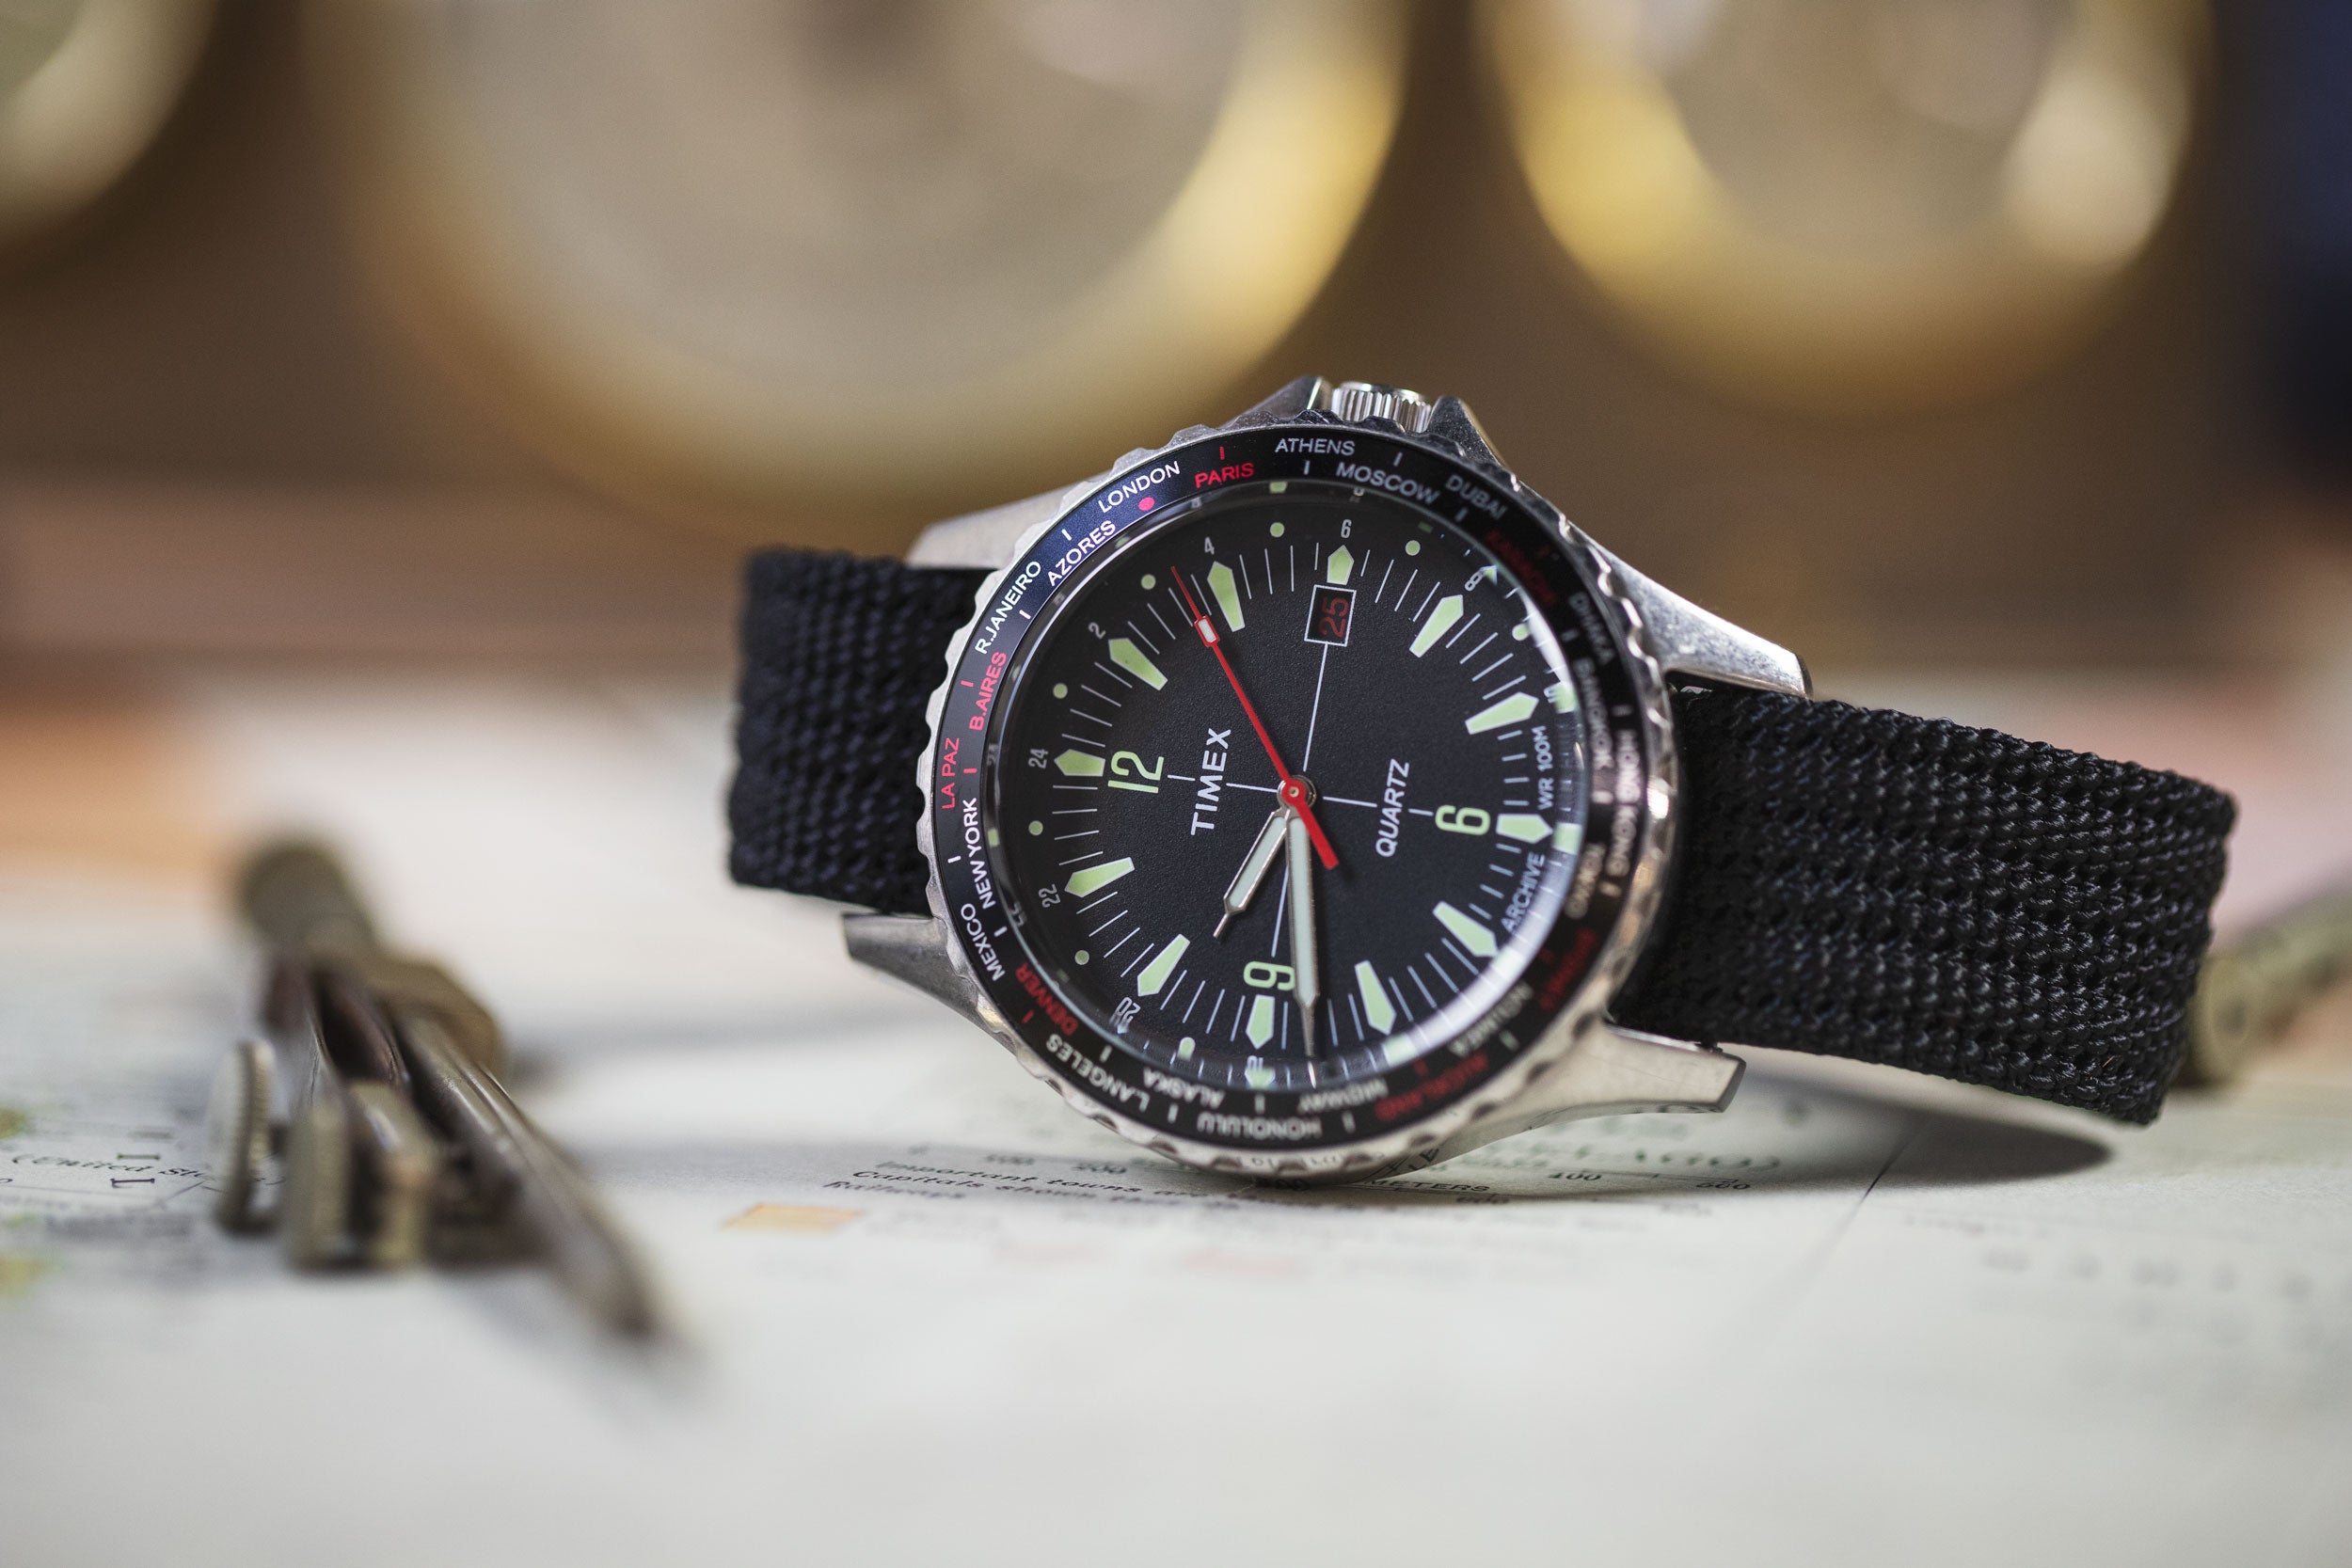 The Timex MK1 Mechanical and Other Archive Series Watches are Now Avai ...